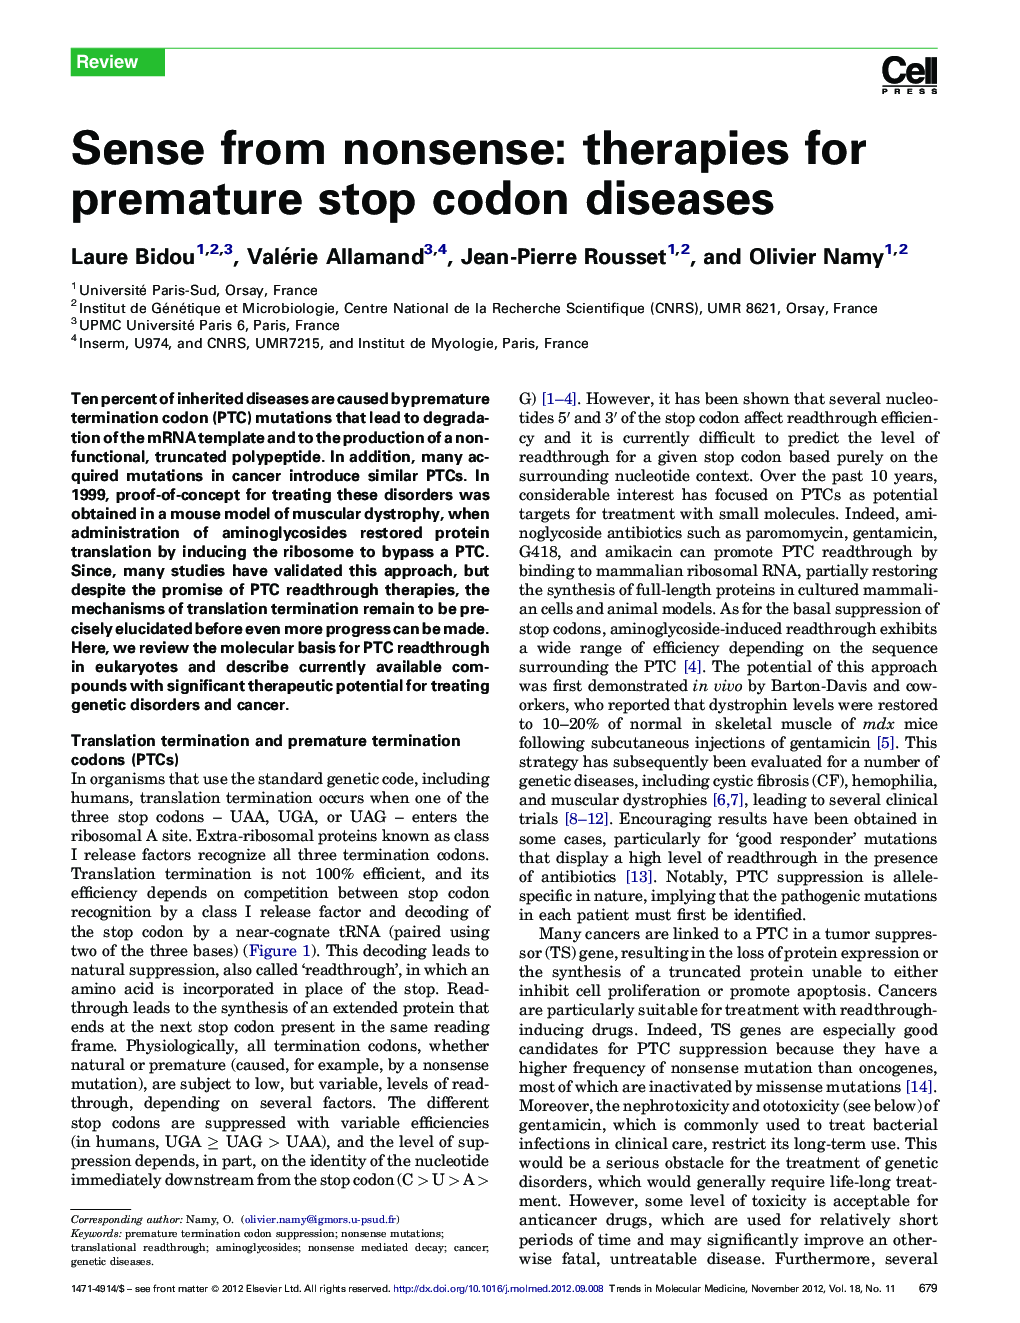 Sense from nonsense: therapies for premature stop codon diseases